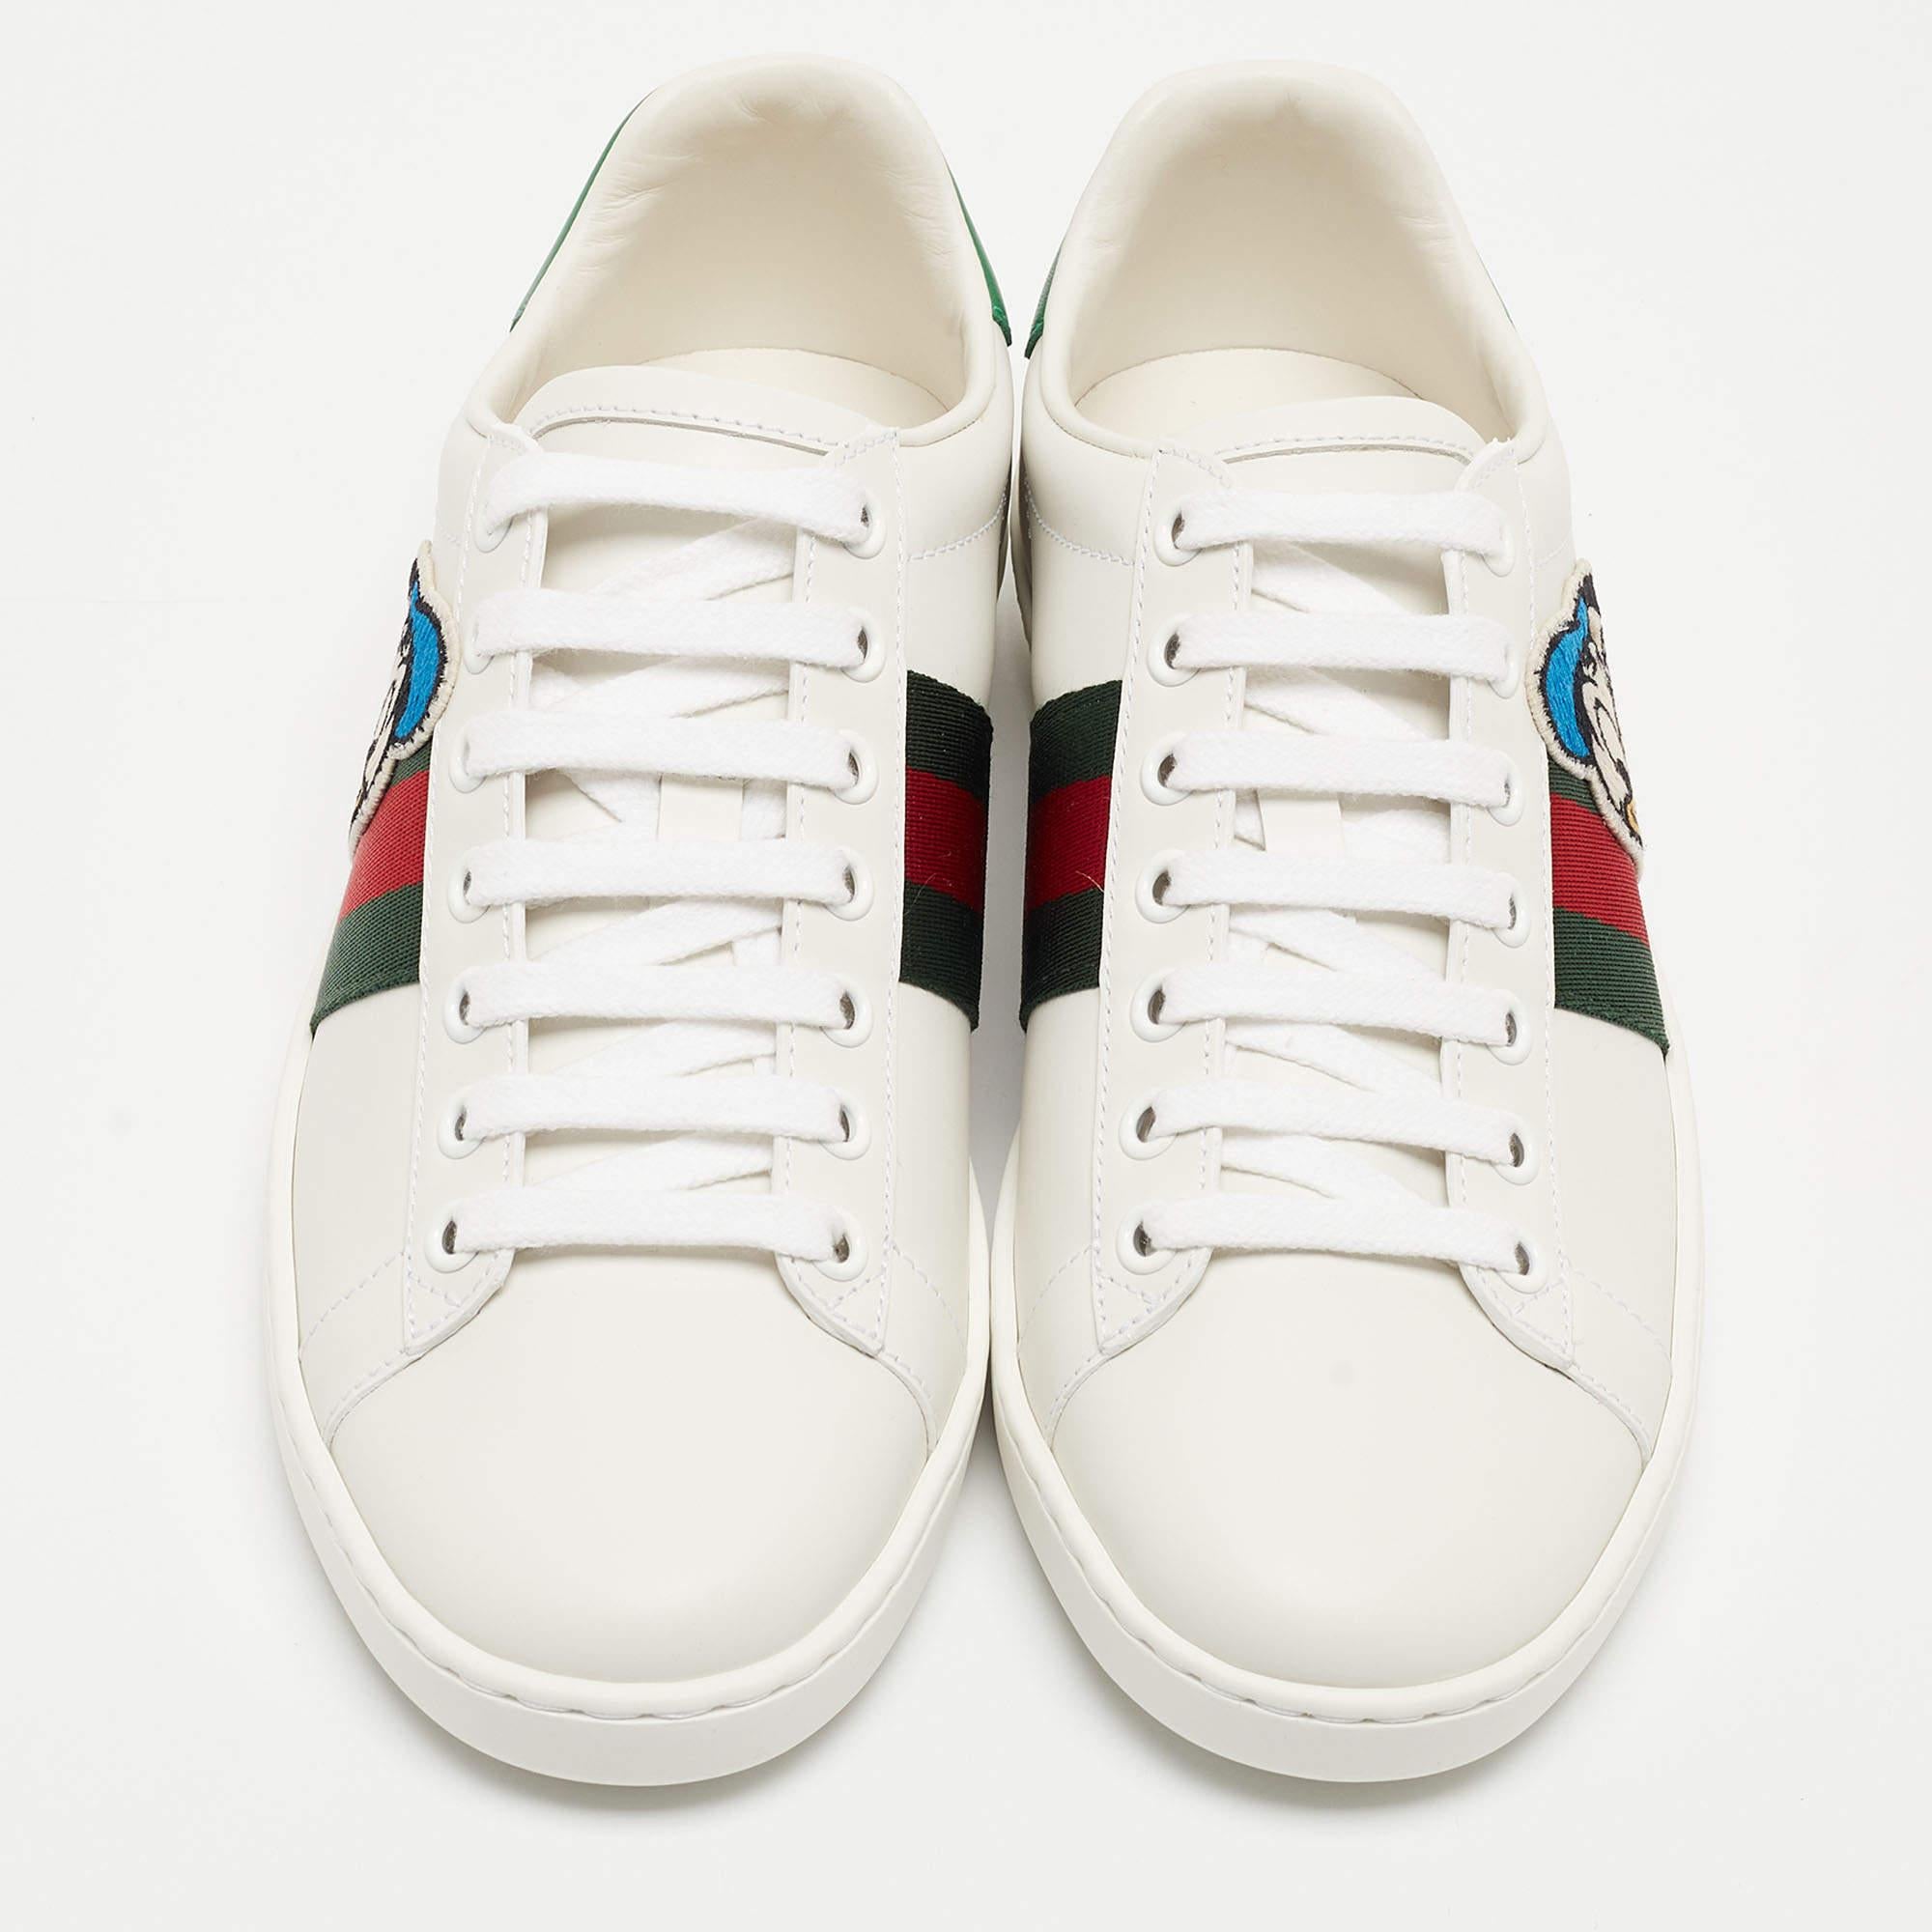 Gucci x Disney White Leather Donald Duck Ace Sneakers Size 34.5 For Sale 1